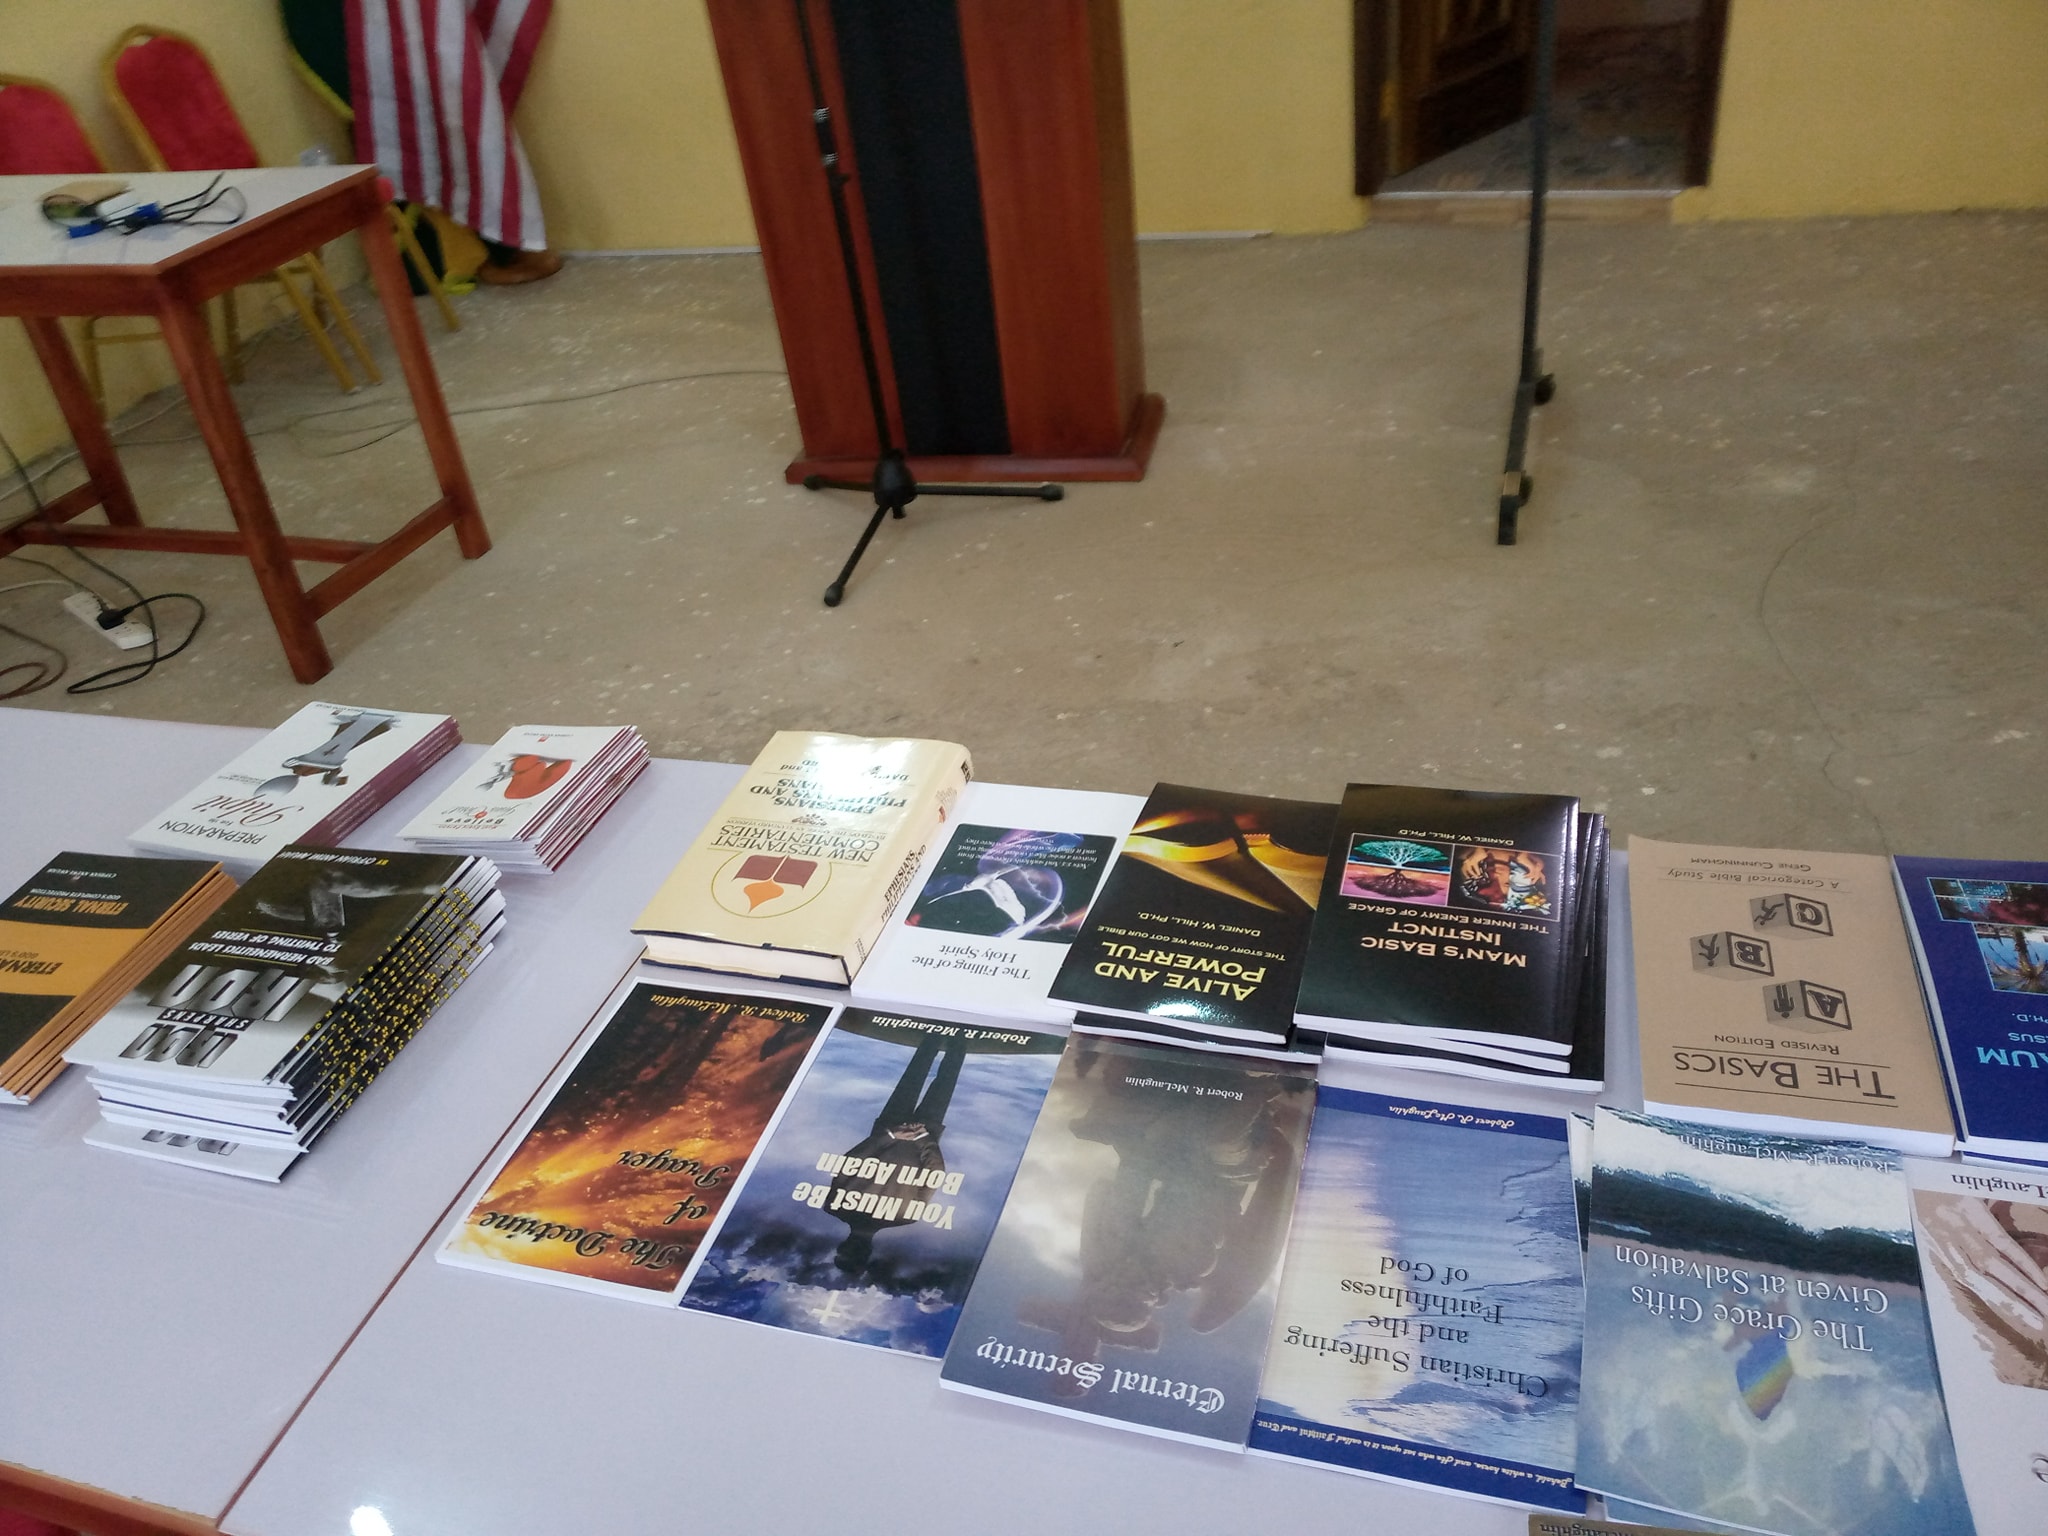 table with christian books